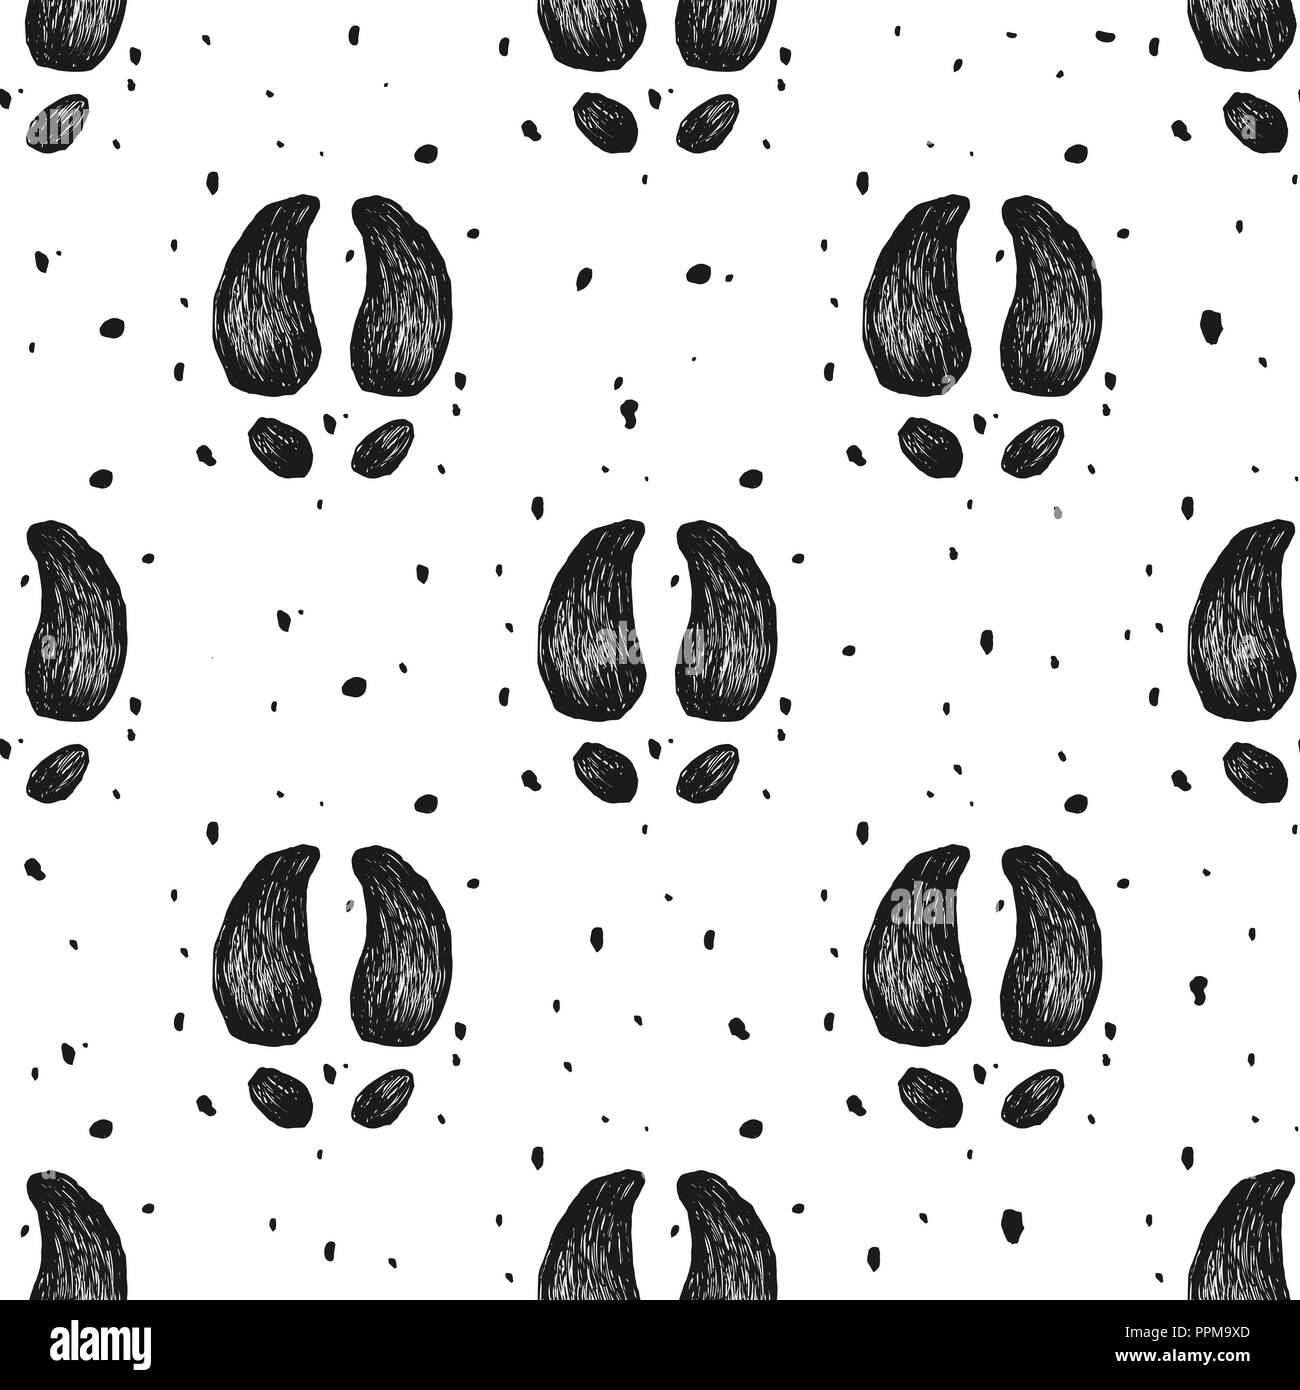 Seamless pattern with pig hoof. Vector illustration. Pig paw hand drawn background. Stock Vector